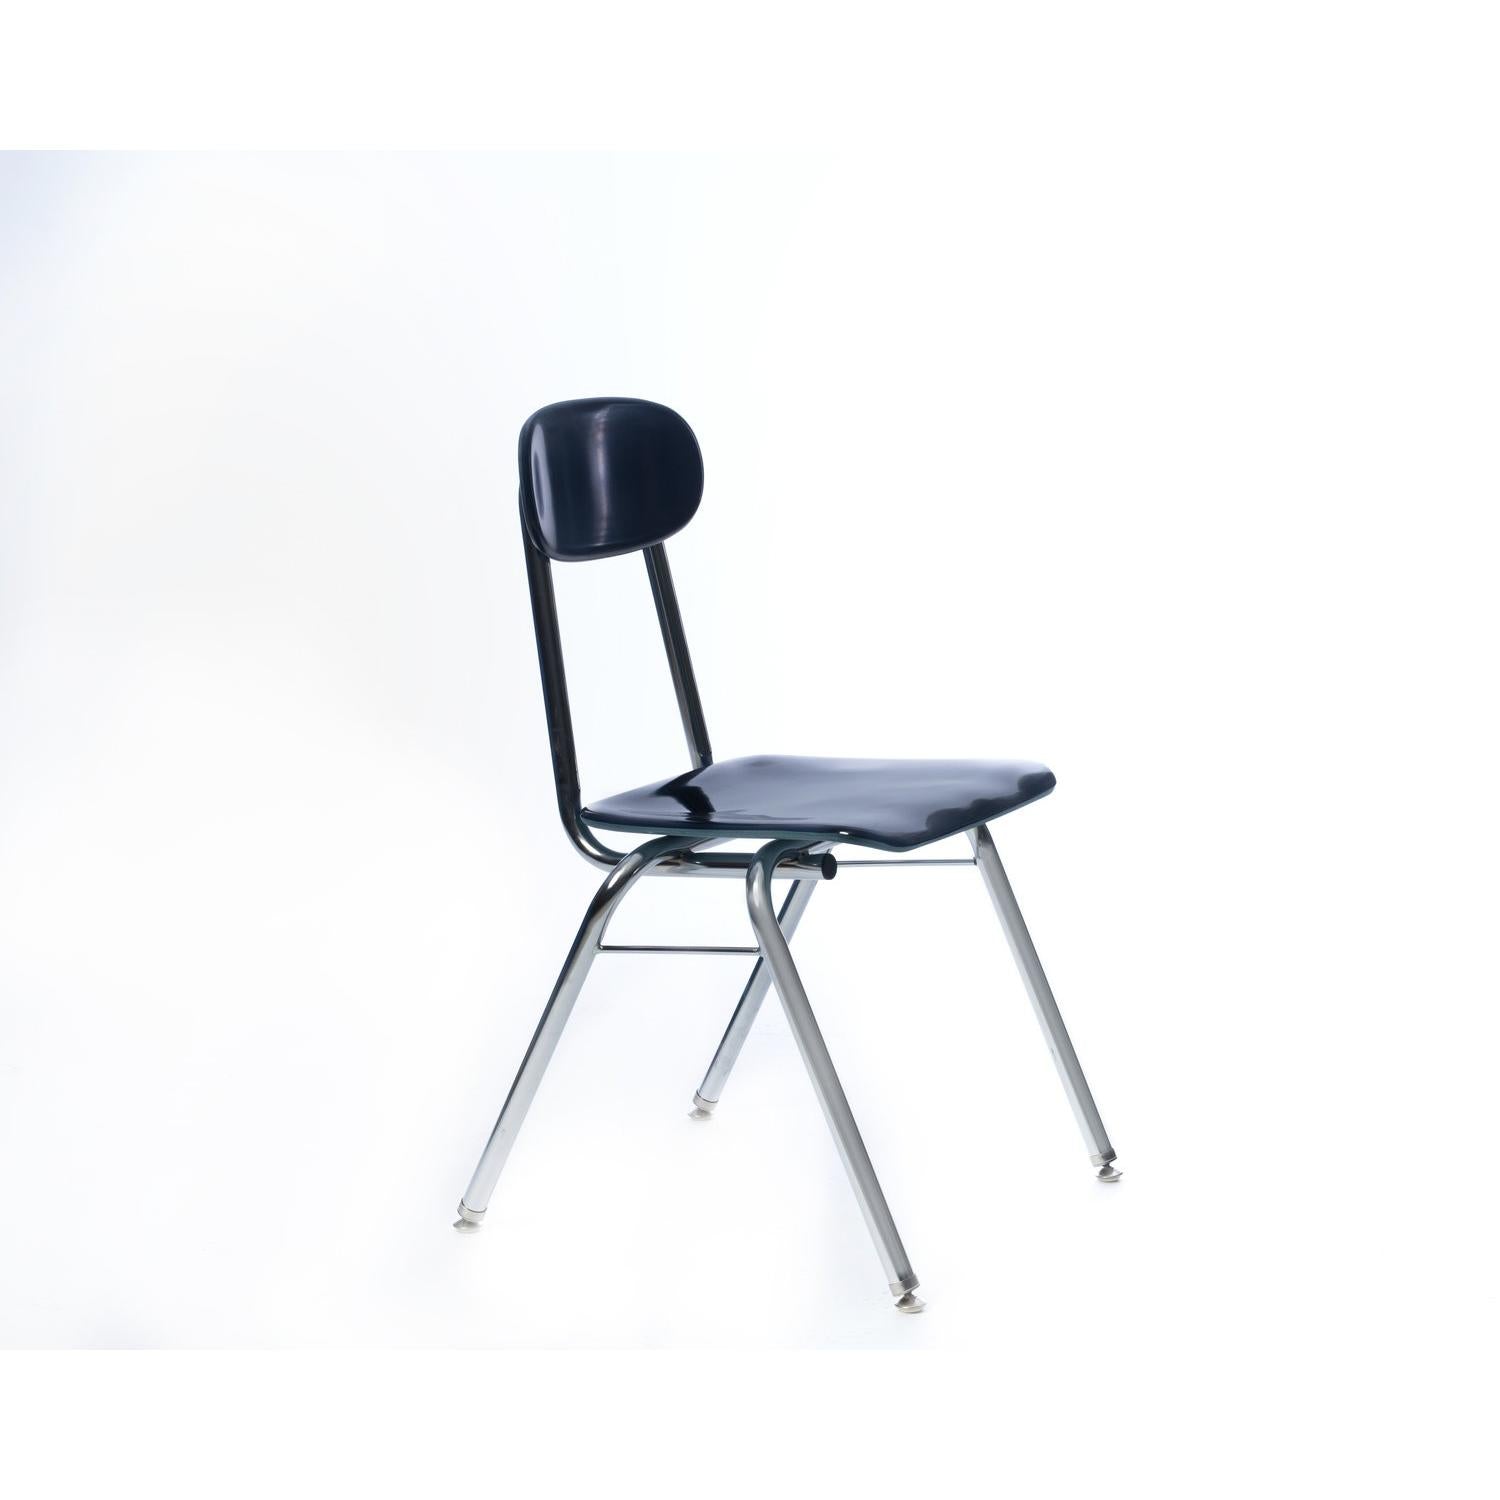 5/8" Solid Plastic V-Leg Stacking School Chair, 17-1/2" Seat Height